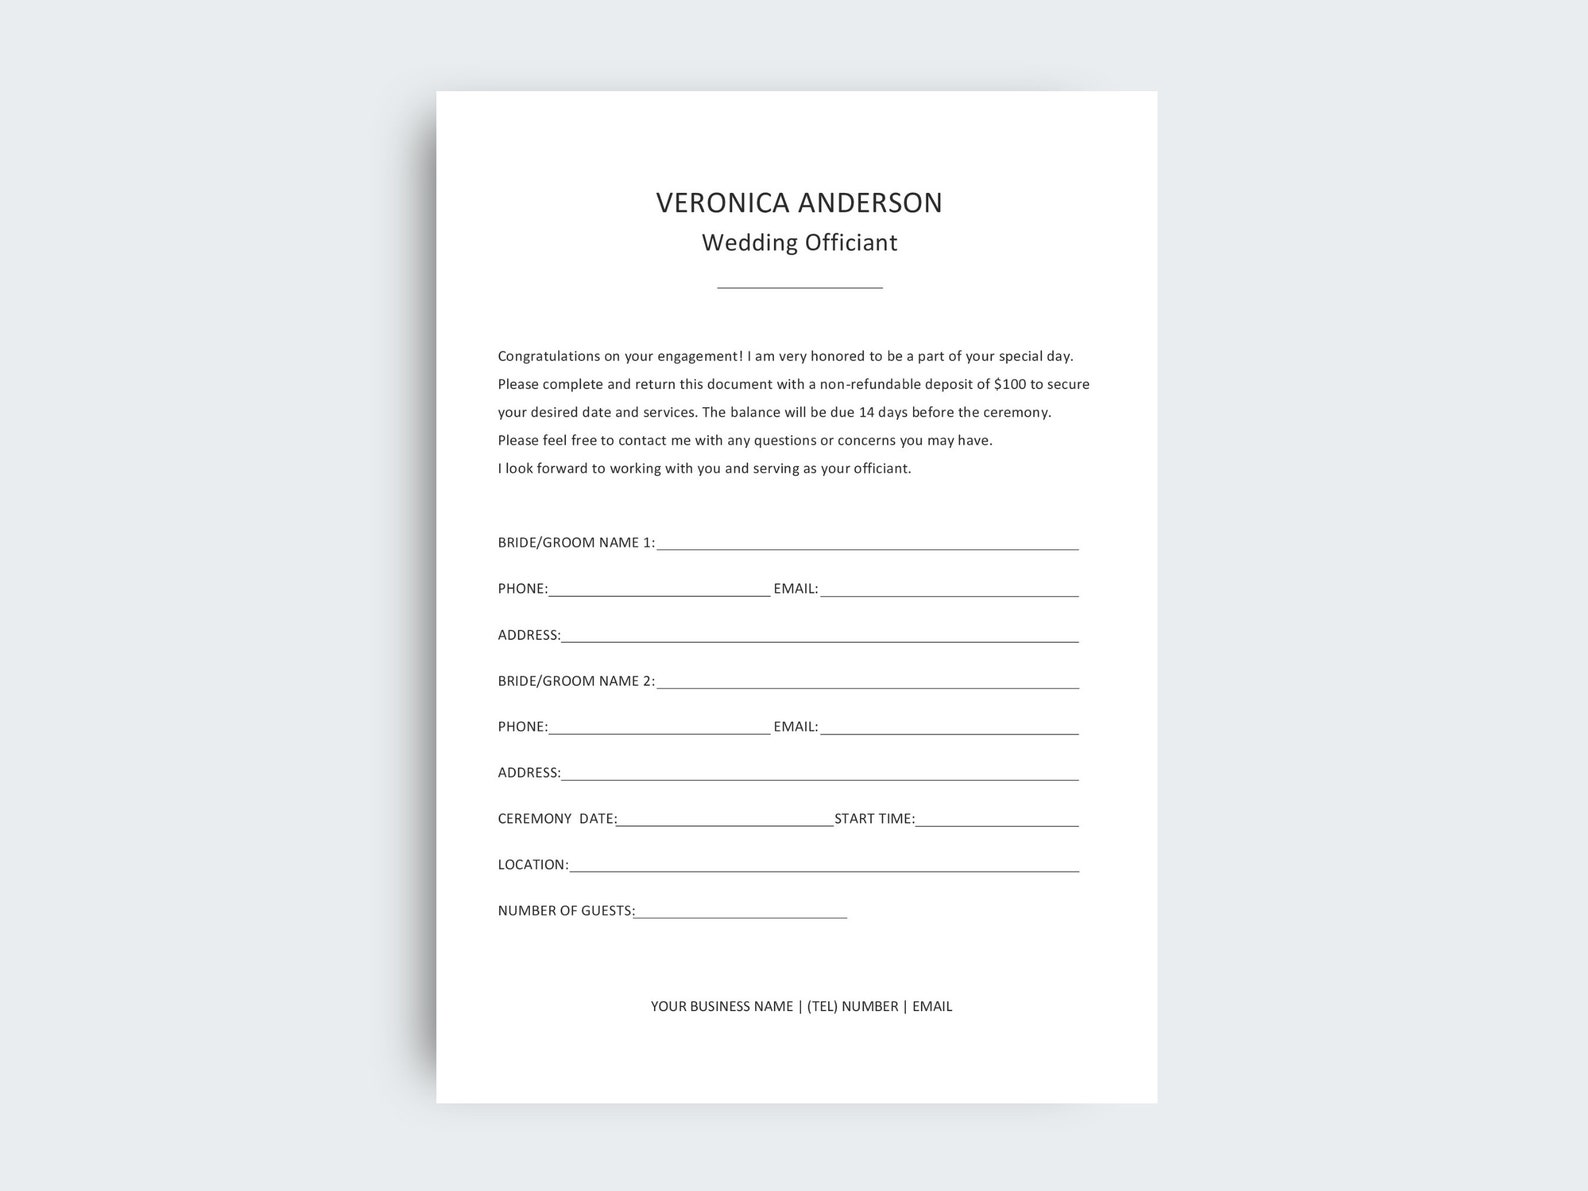 wedding-officiant-contract-template-editable-marriage-etsy-australia